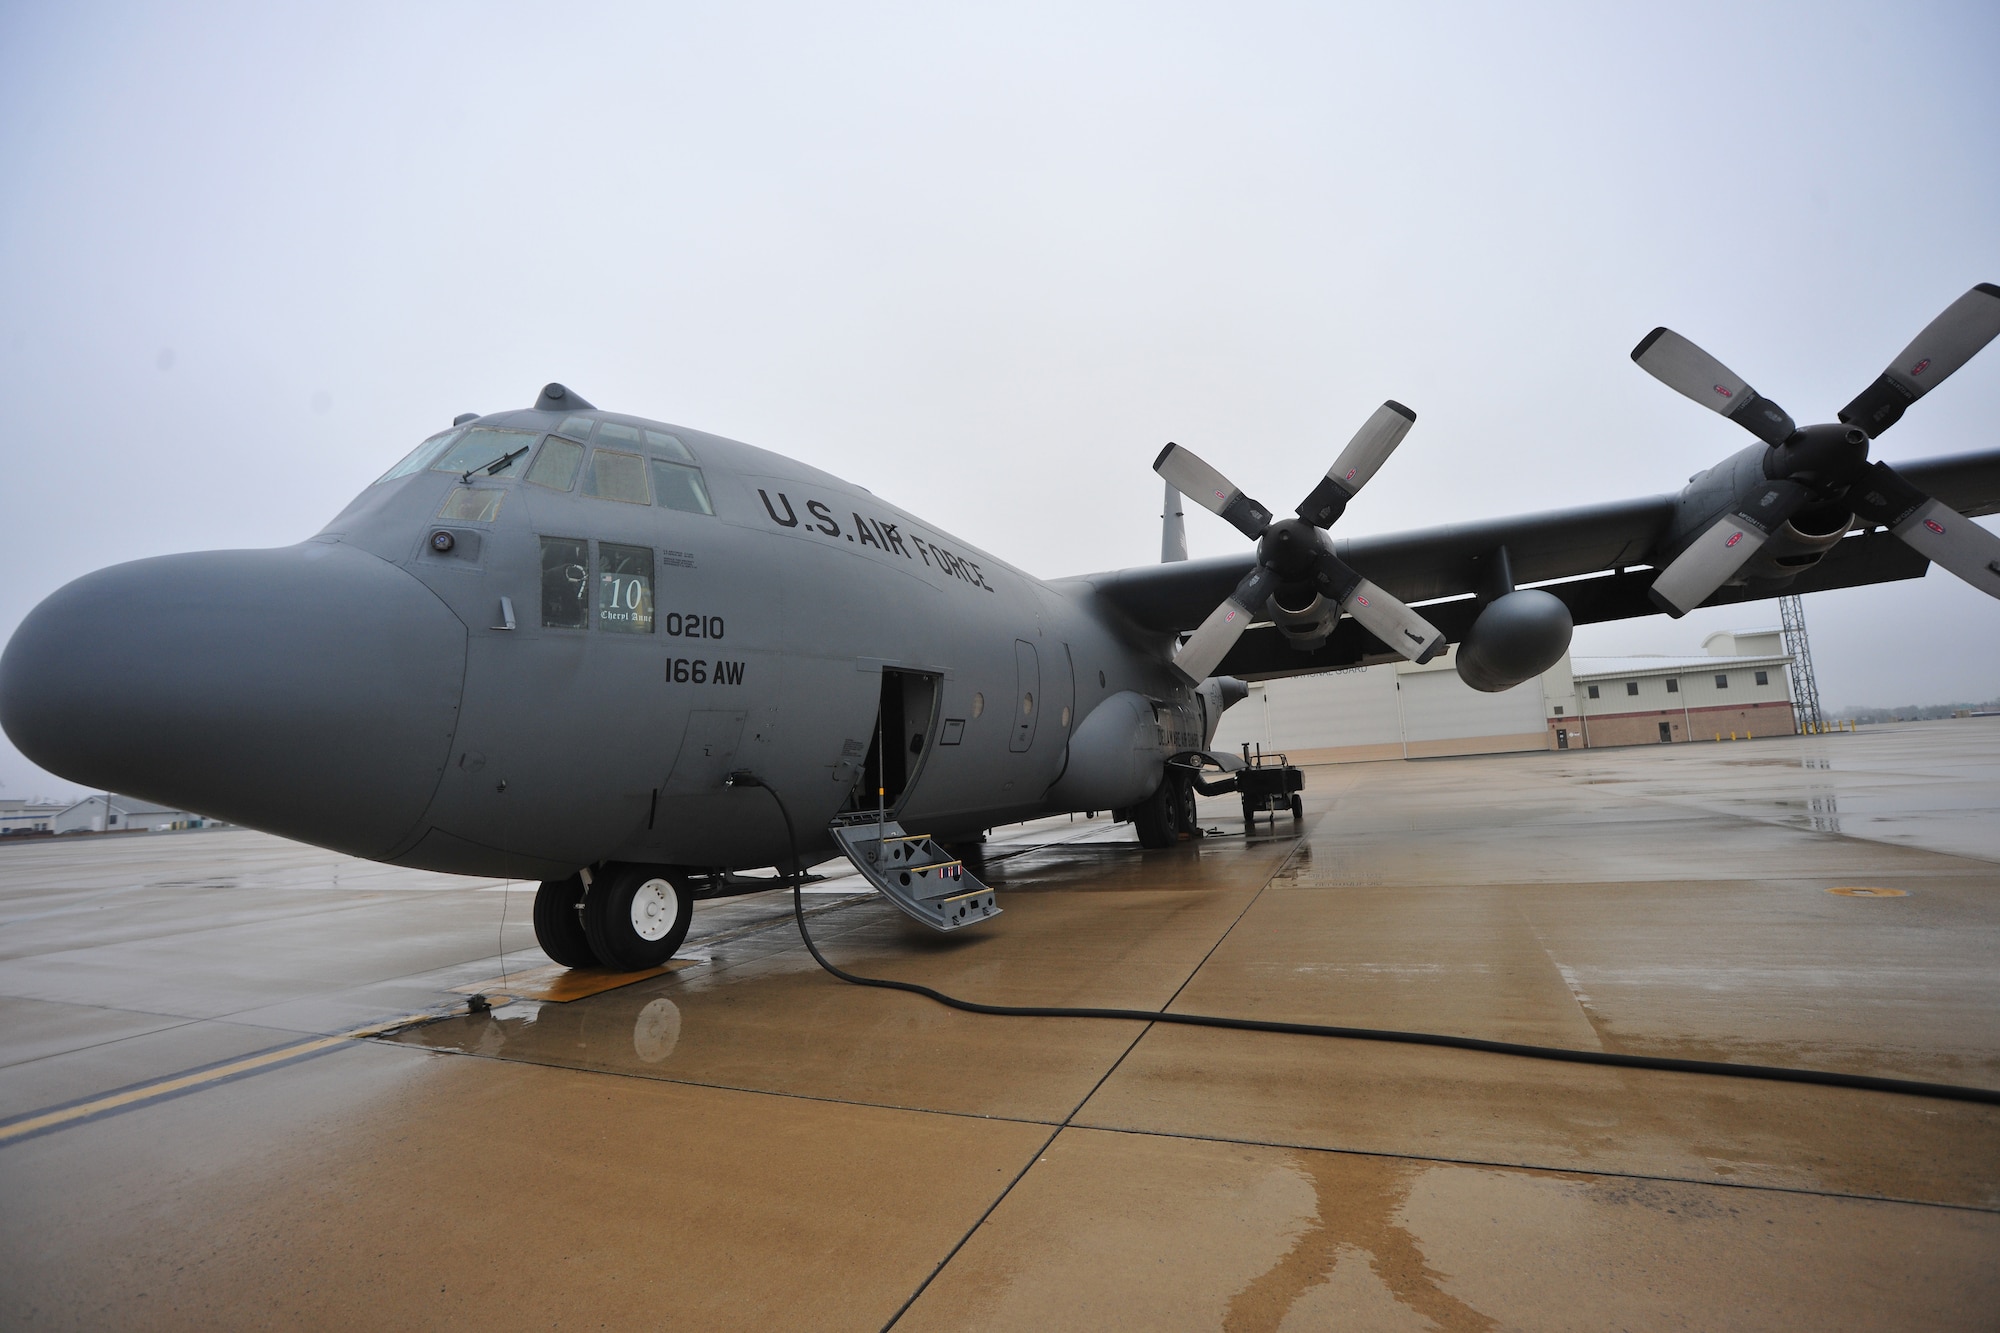 A C-130 Hercules transport aircraft of the 166th Airlift Wing, Delaware Air National Guard at the New Castle ANG Base, Del., April 10, 2015. The aircraft will be flown April 11 during Operation Cyclone, a Delaware National Guard joint training exercise when Airmen and Soldiers will respond to a simulated tornado that has swept through New Castle County. Army Black Hawk helicopters will evacuate simulated wounded personnel to the air base, with patients loaded onto C-130s for aerial evacuation. Separate from the exercise, on April 12, six C-130s will participate in the largest formation flown by the wing since departing for Southwest Asia in March 2003 to support Operation Iraqi Freedom. (U.S. Air National Guard photo by Staff Sgt. John Michaels)